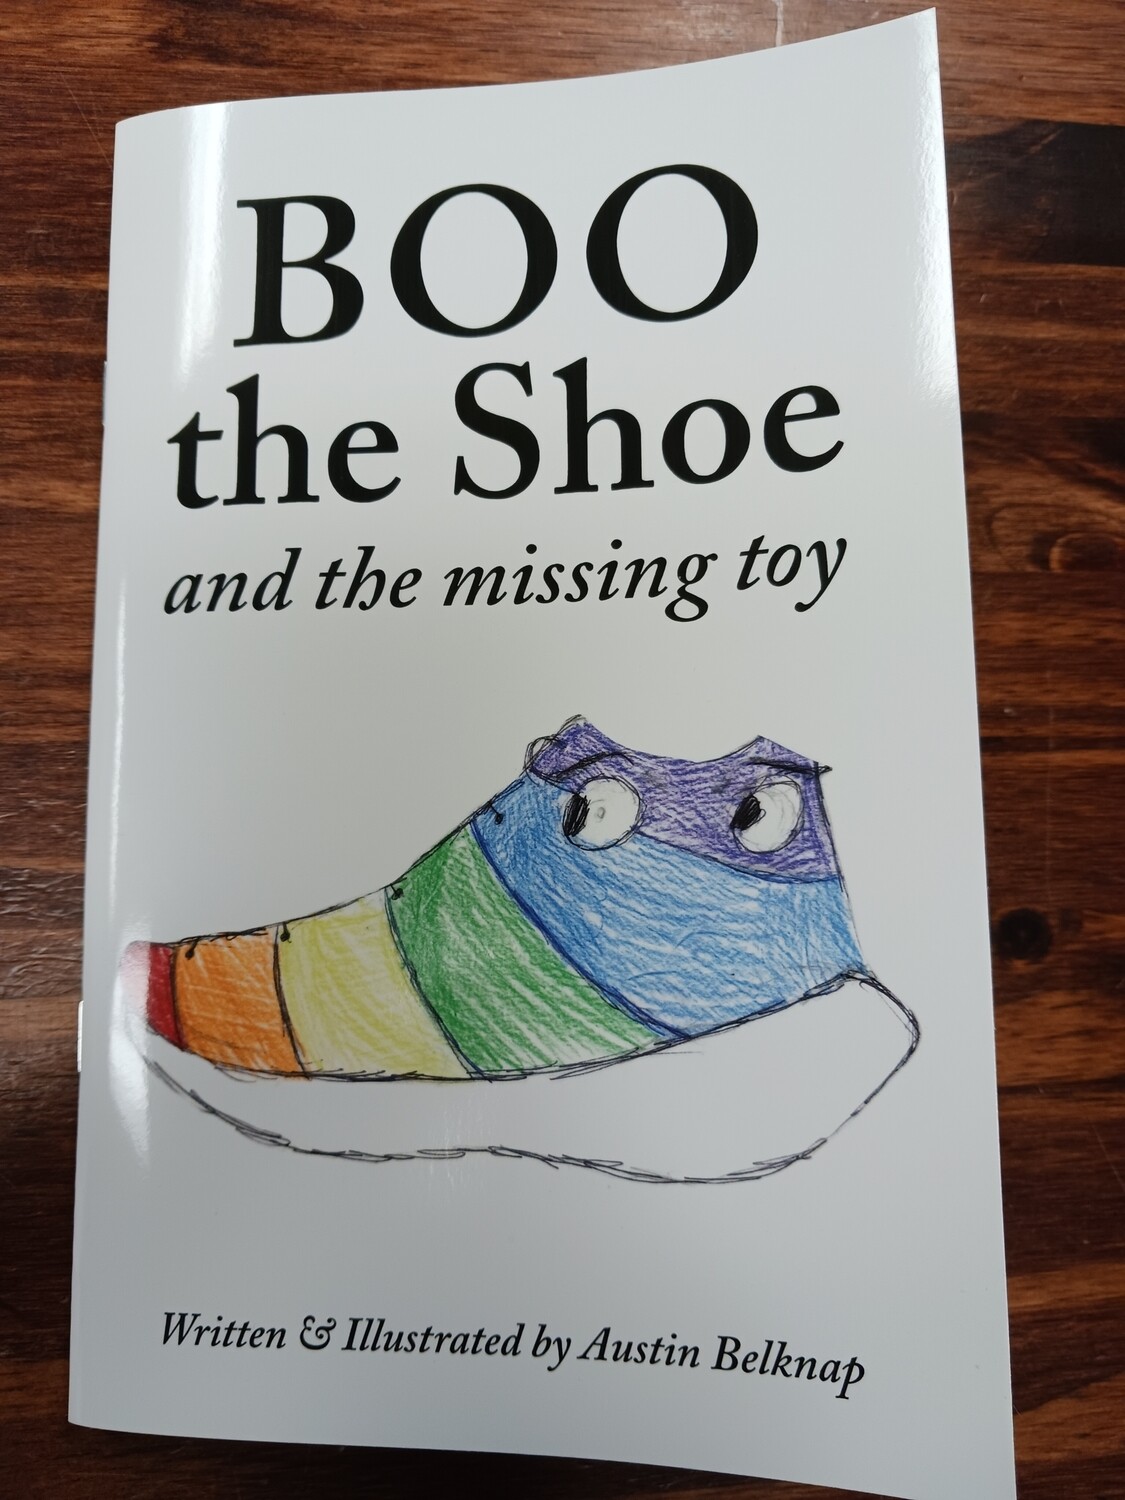 Boo the Shoe and the missing toy